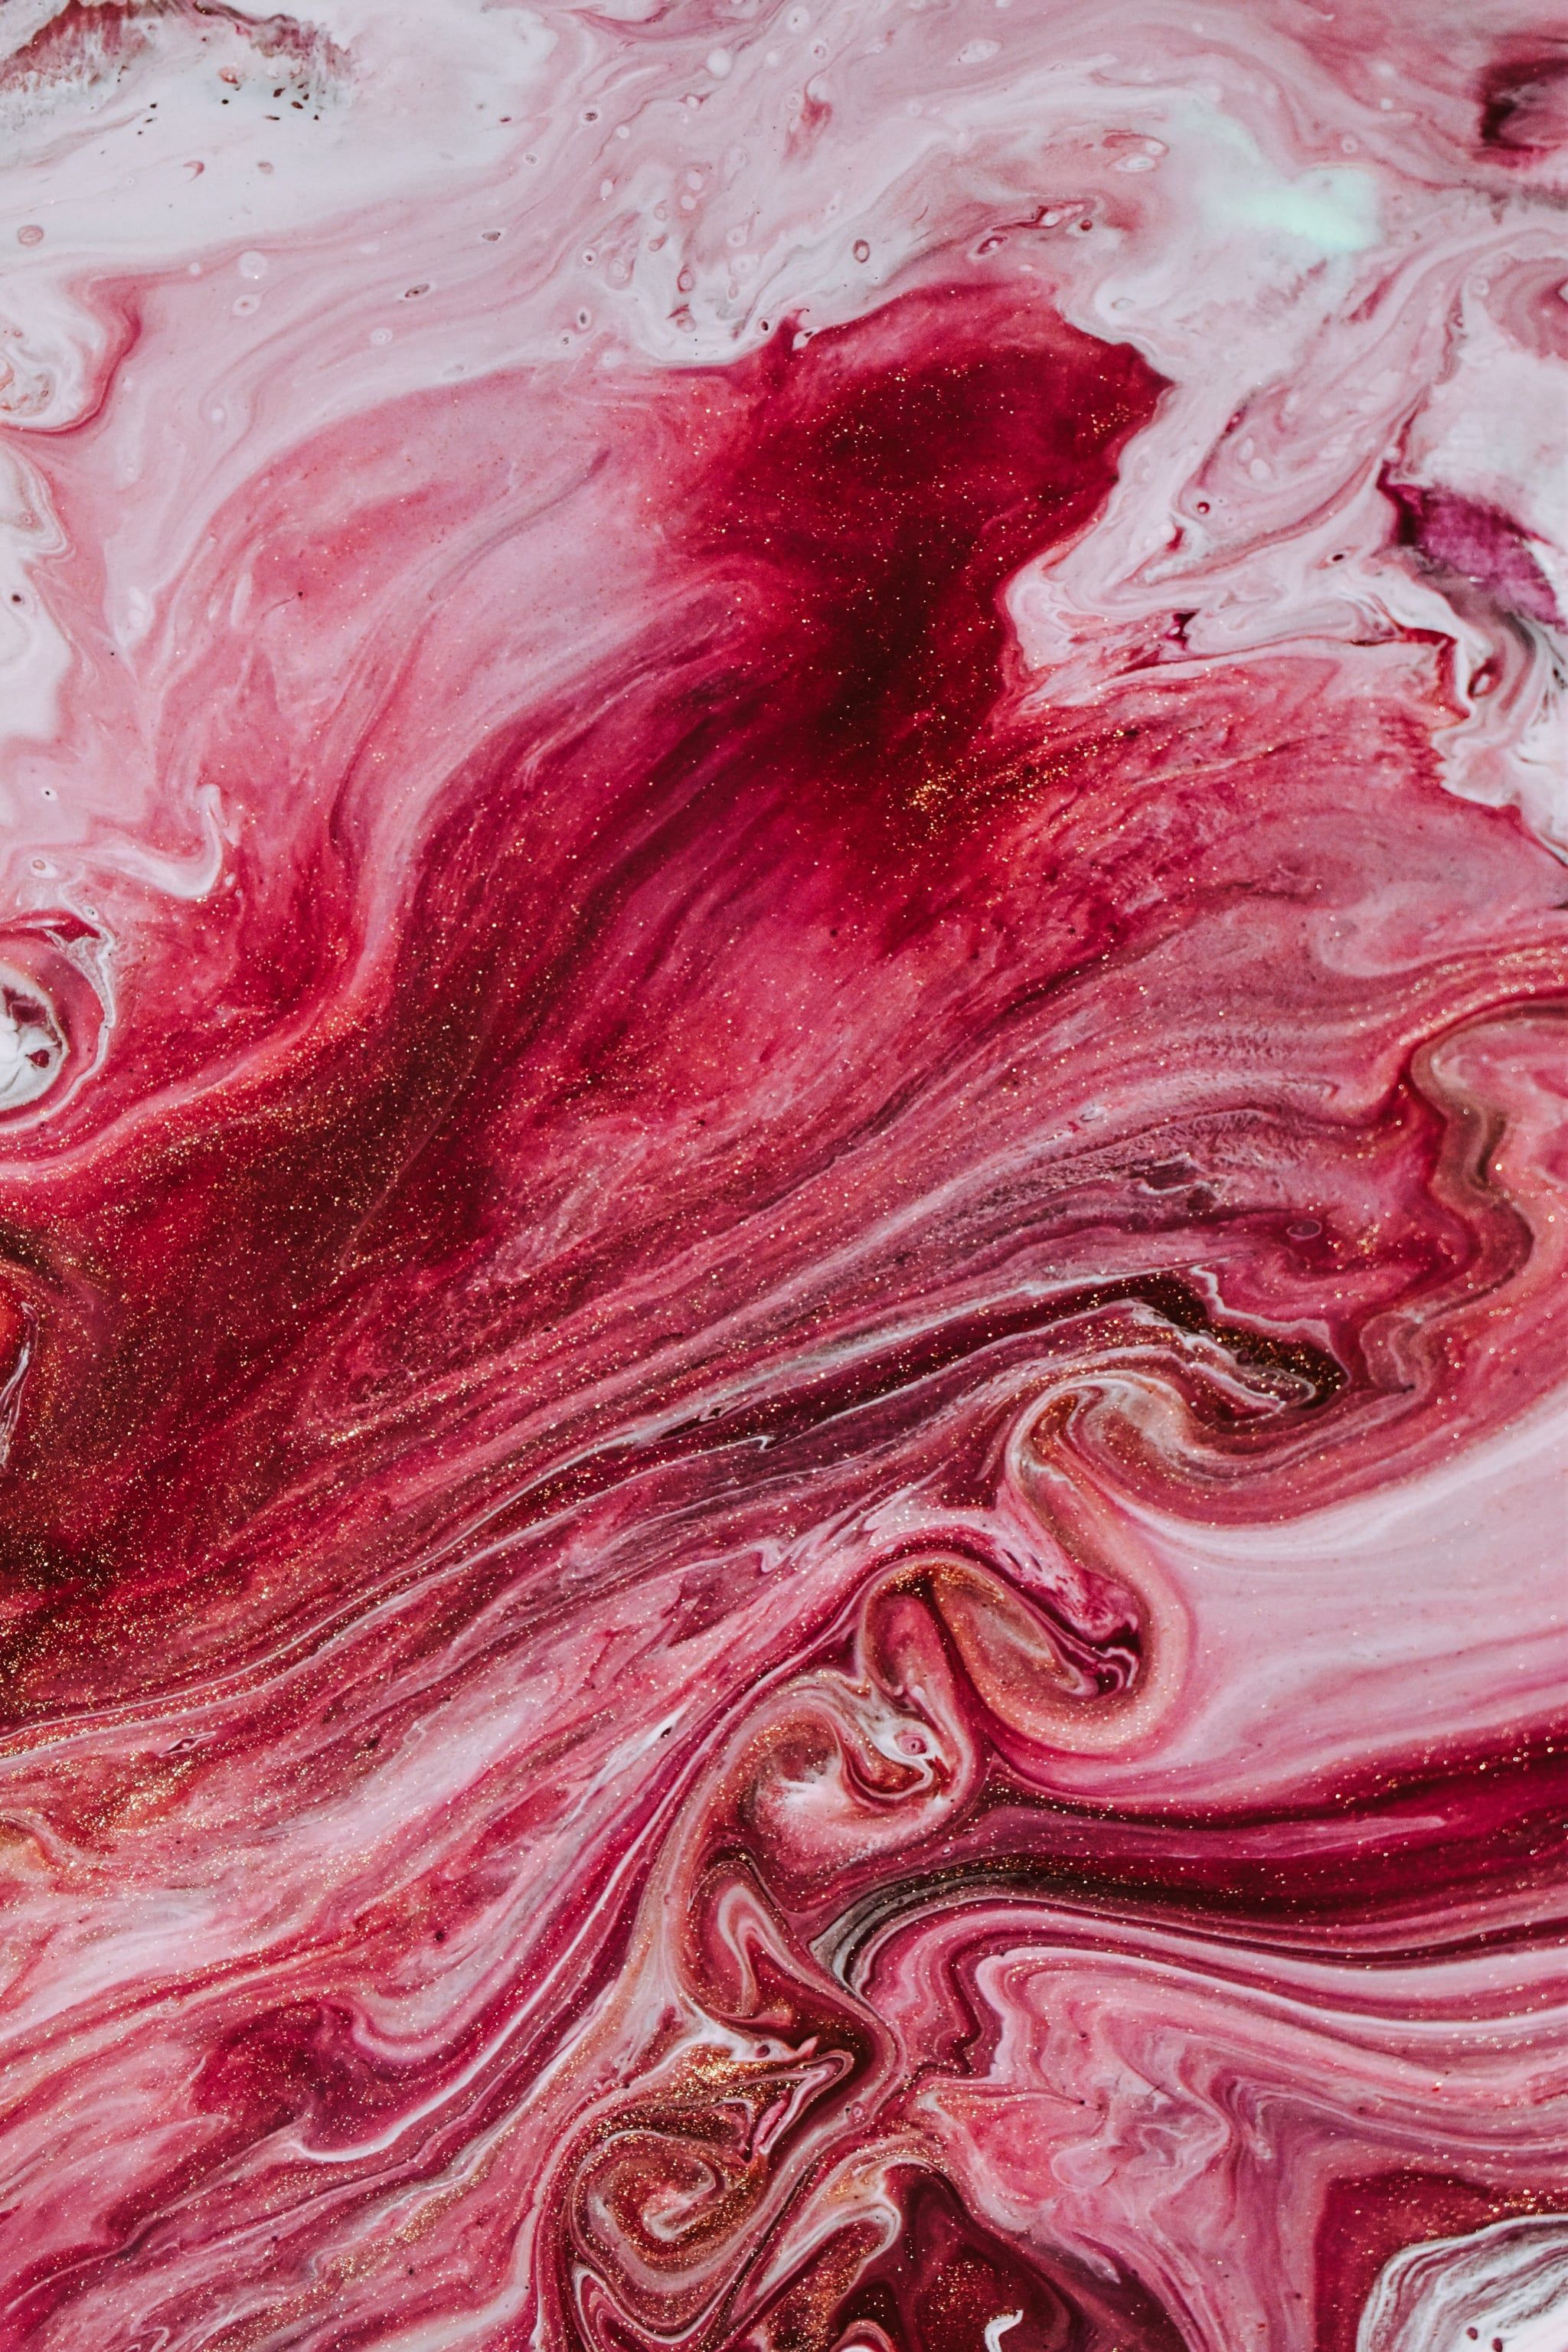 A close up of red and white paint - Pattern, bling, Valentine's Day, abstract, marble